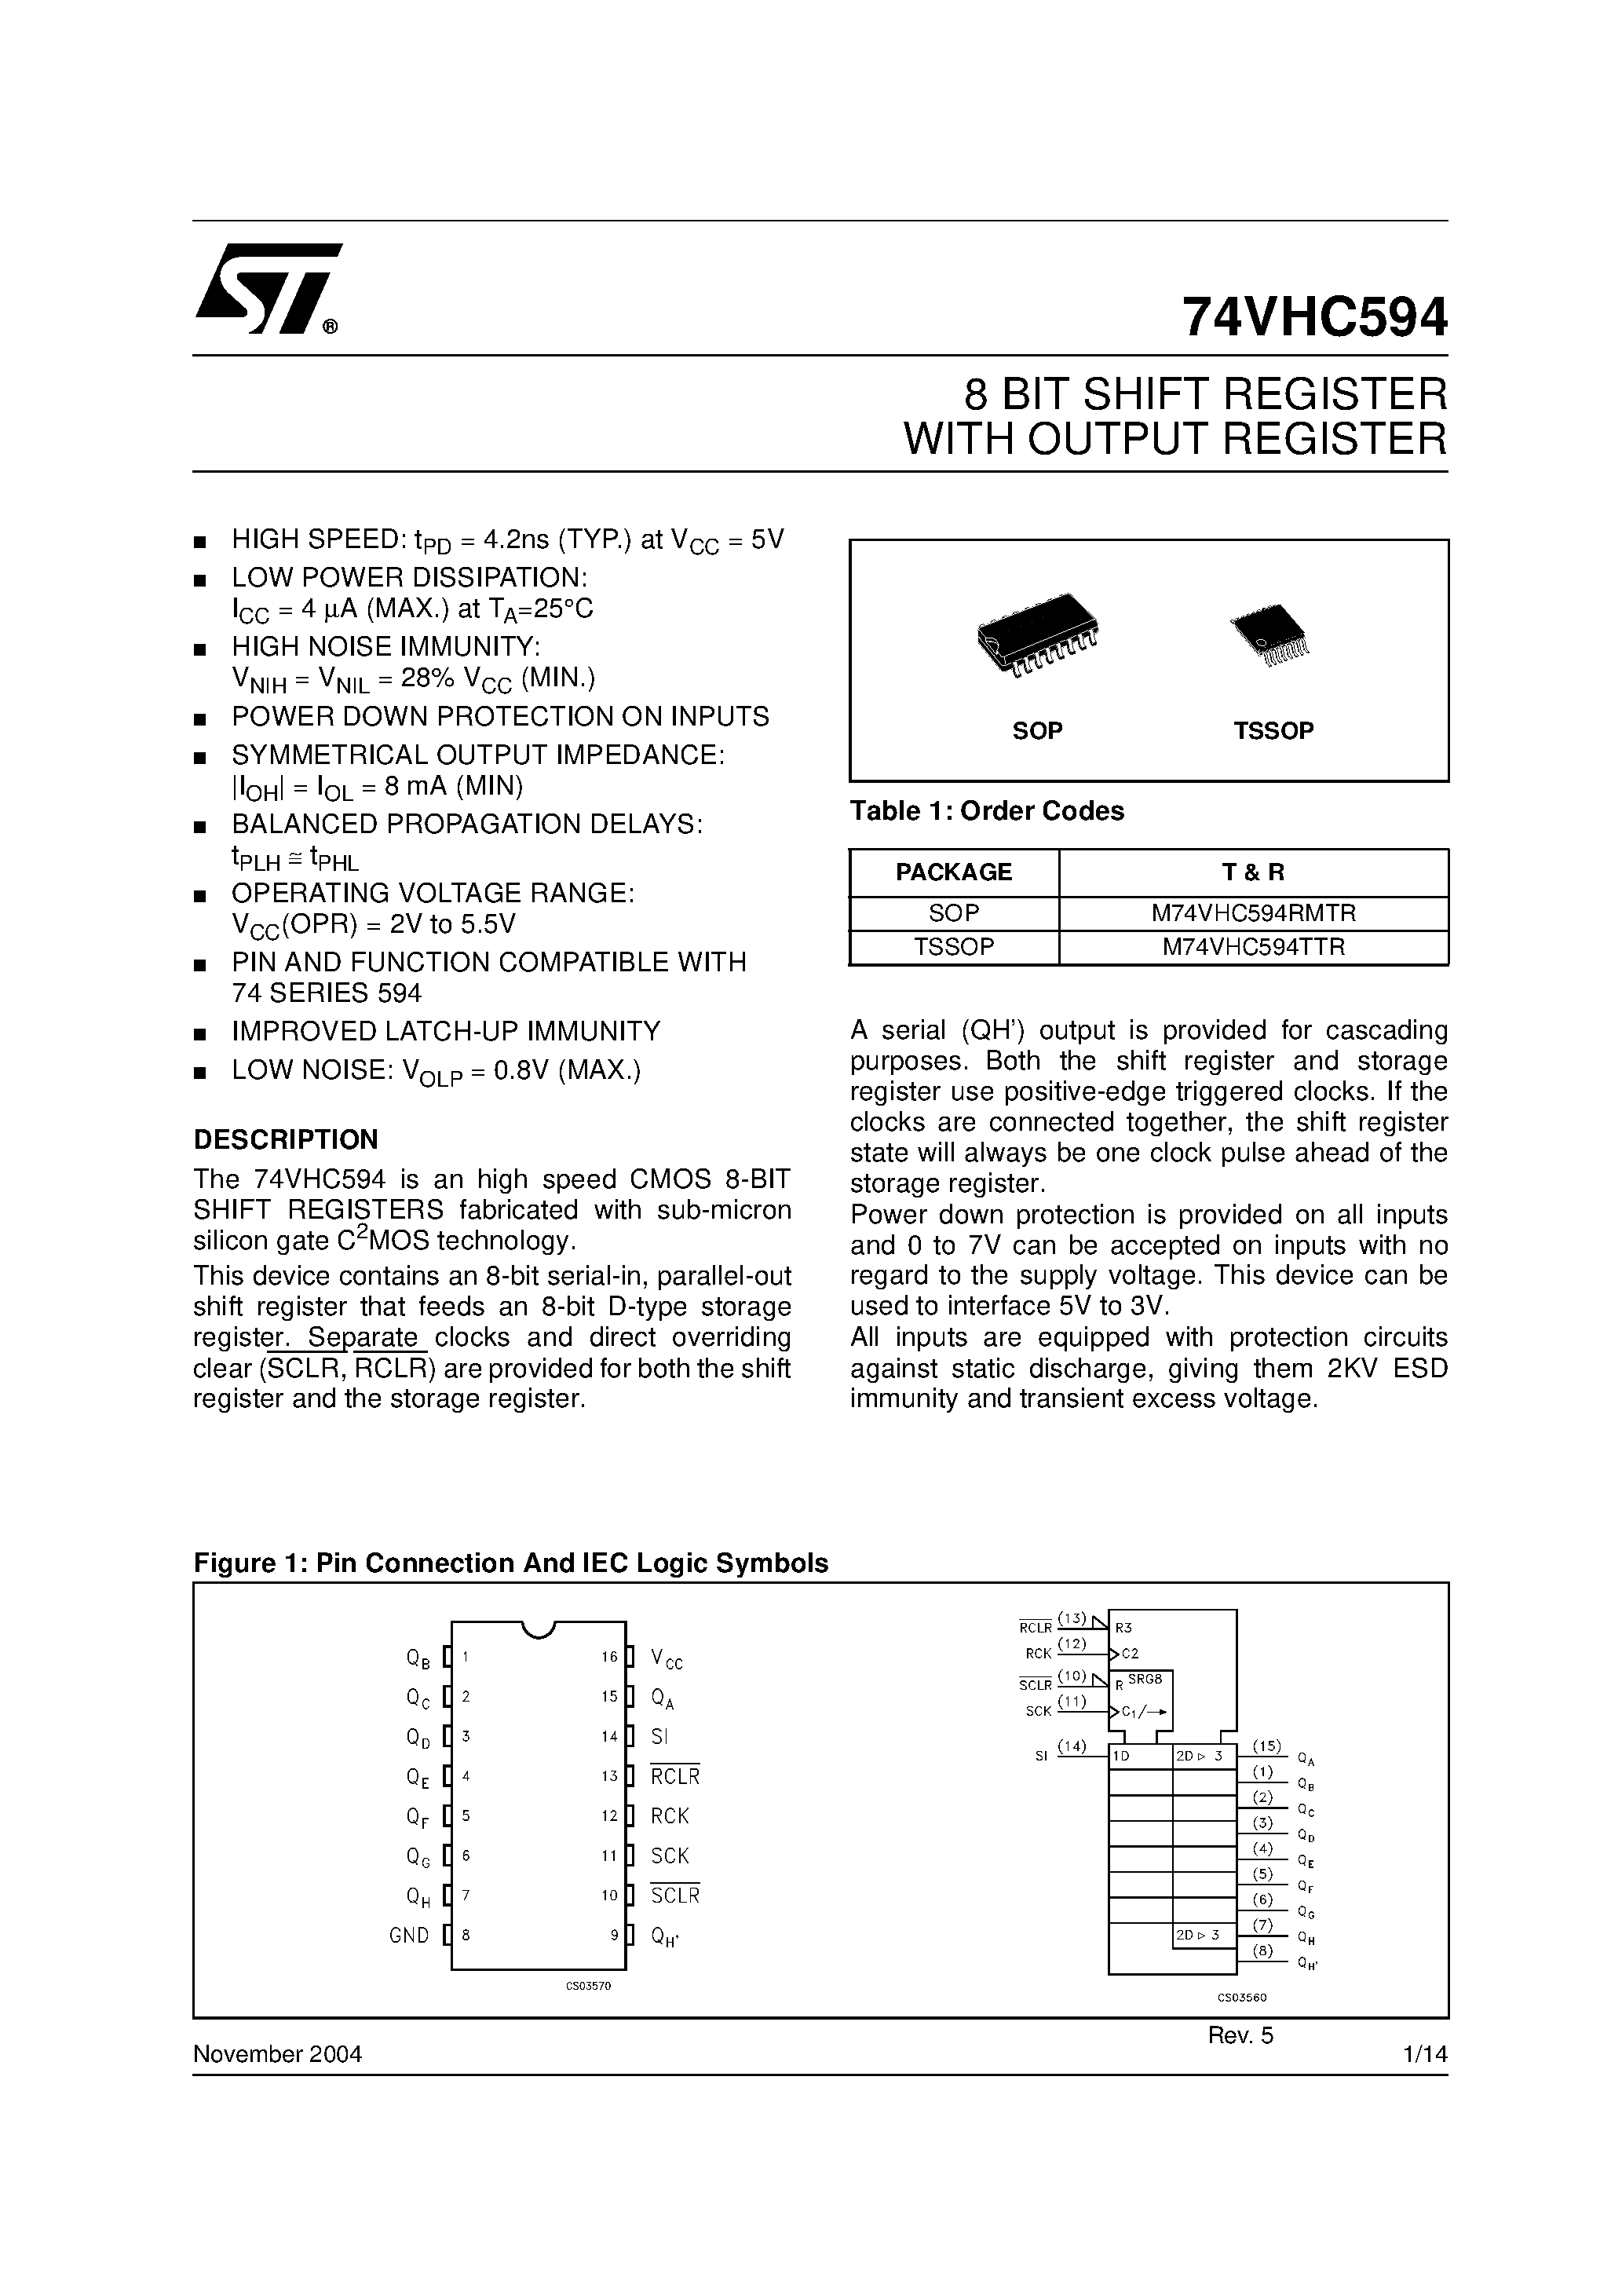 Datasheet M74VHC594RMTR - 8 BIT SHIFT REGISTER WITH OUTPUT REGISTER page 1